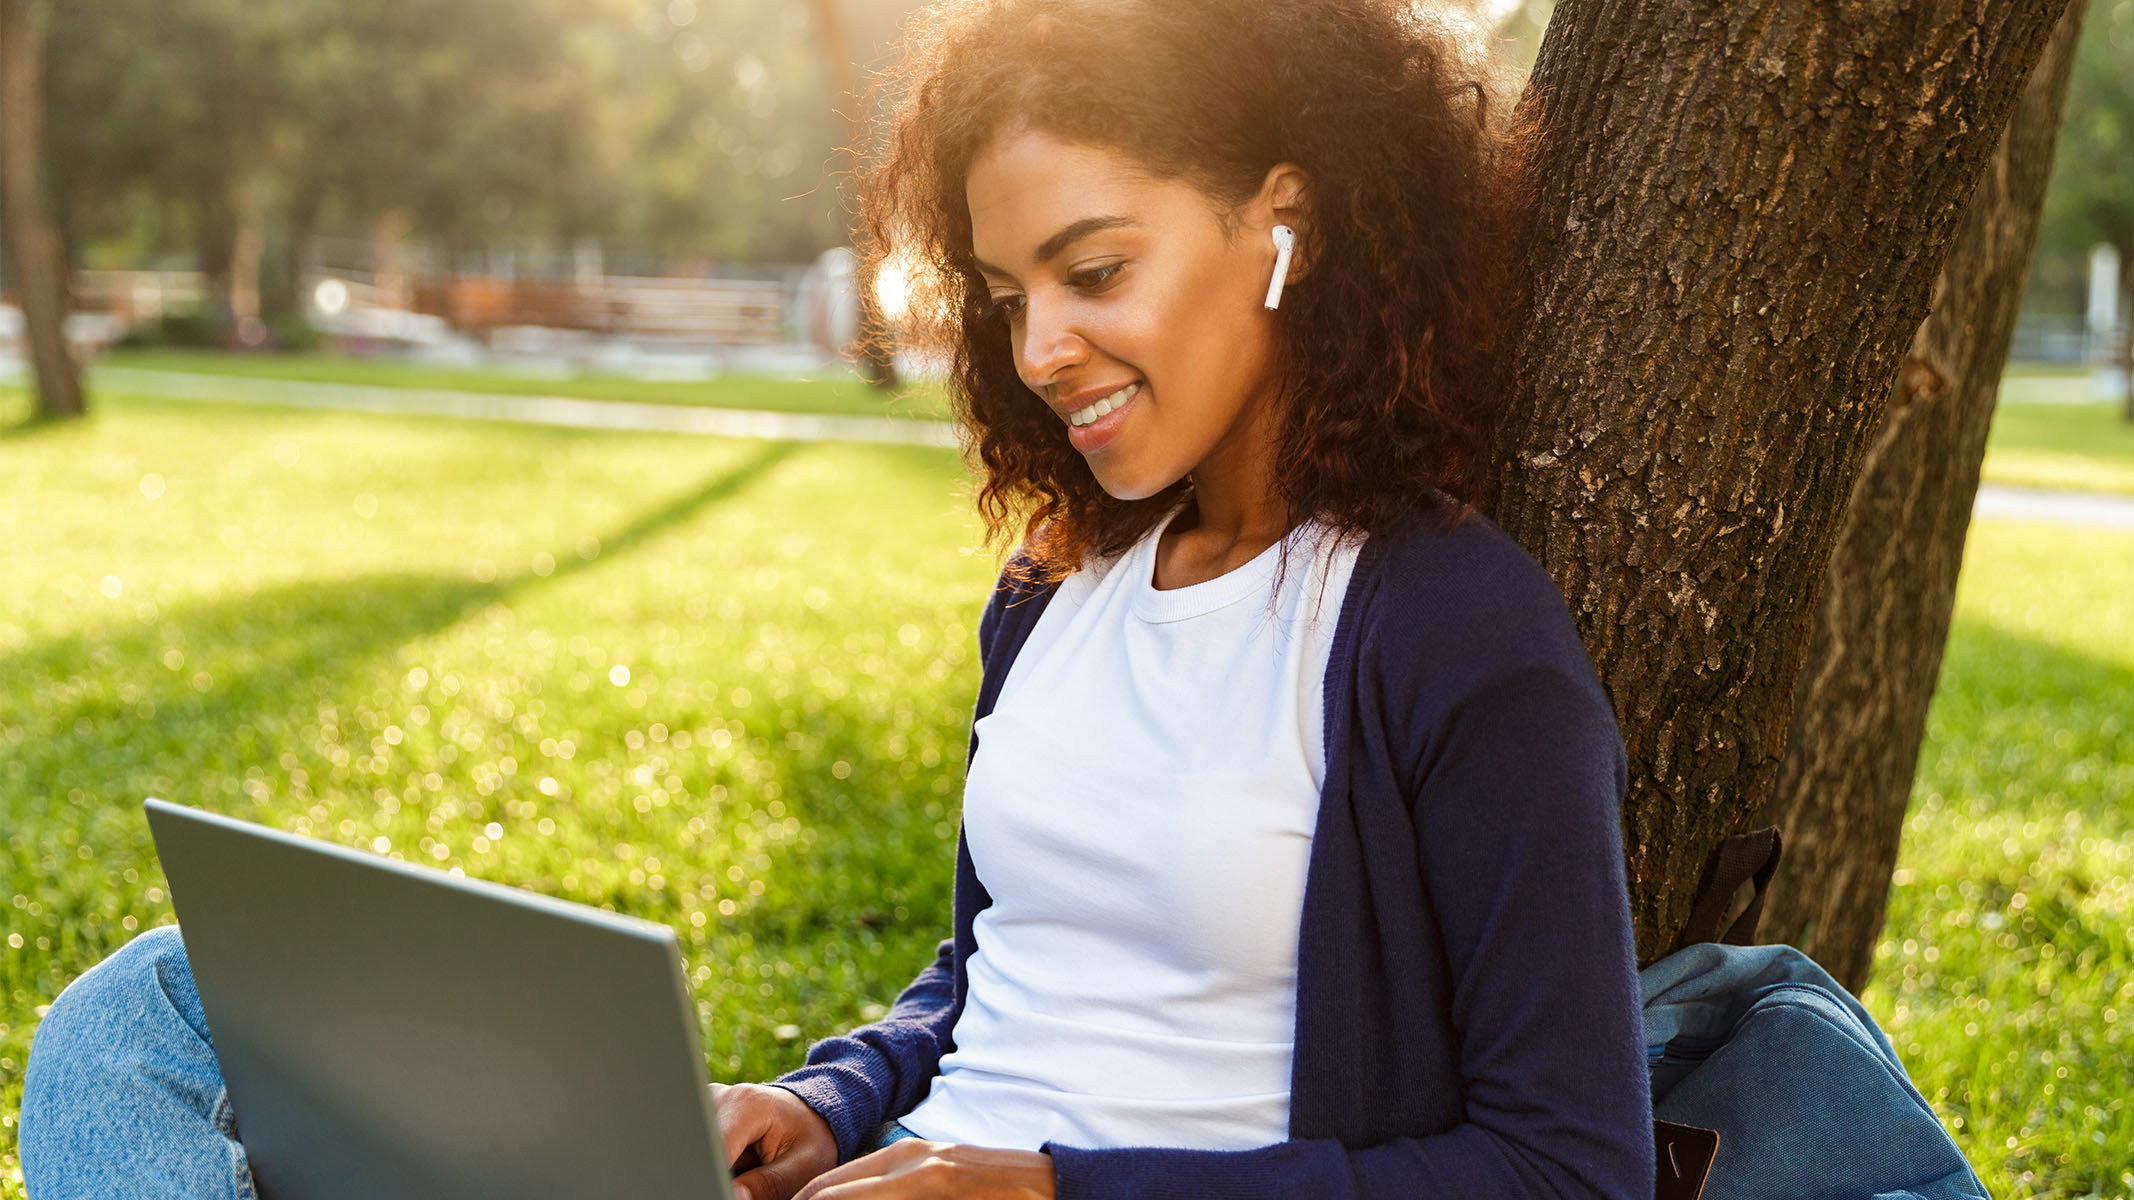 Young woman sitting outside listening to music while working on her laptop